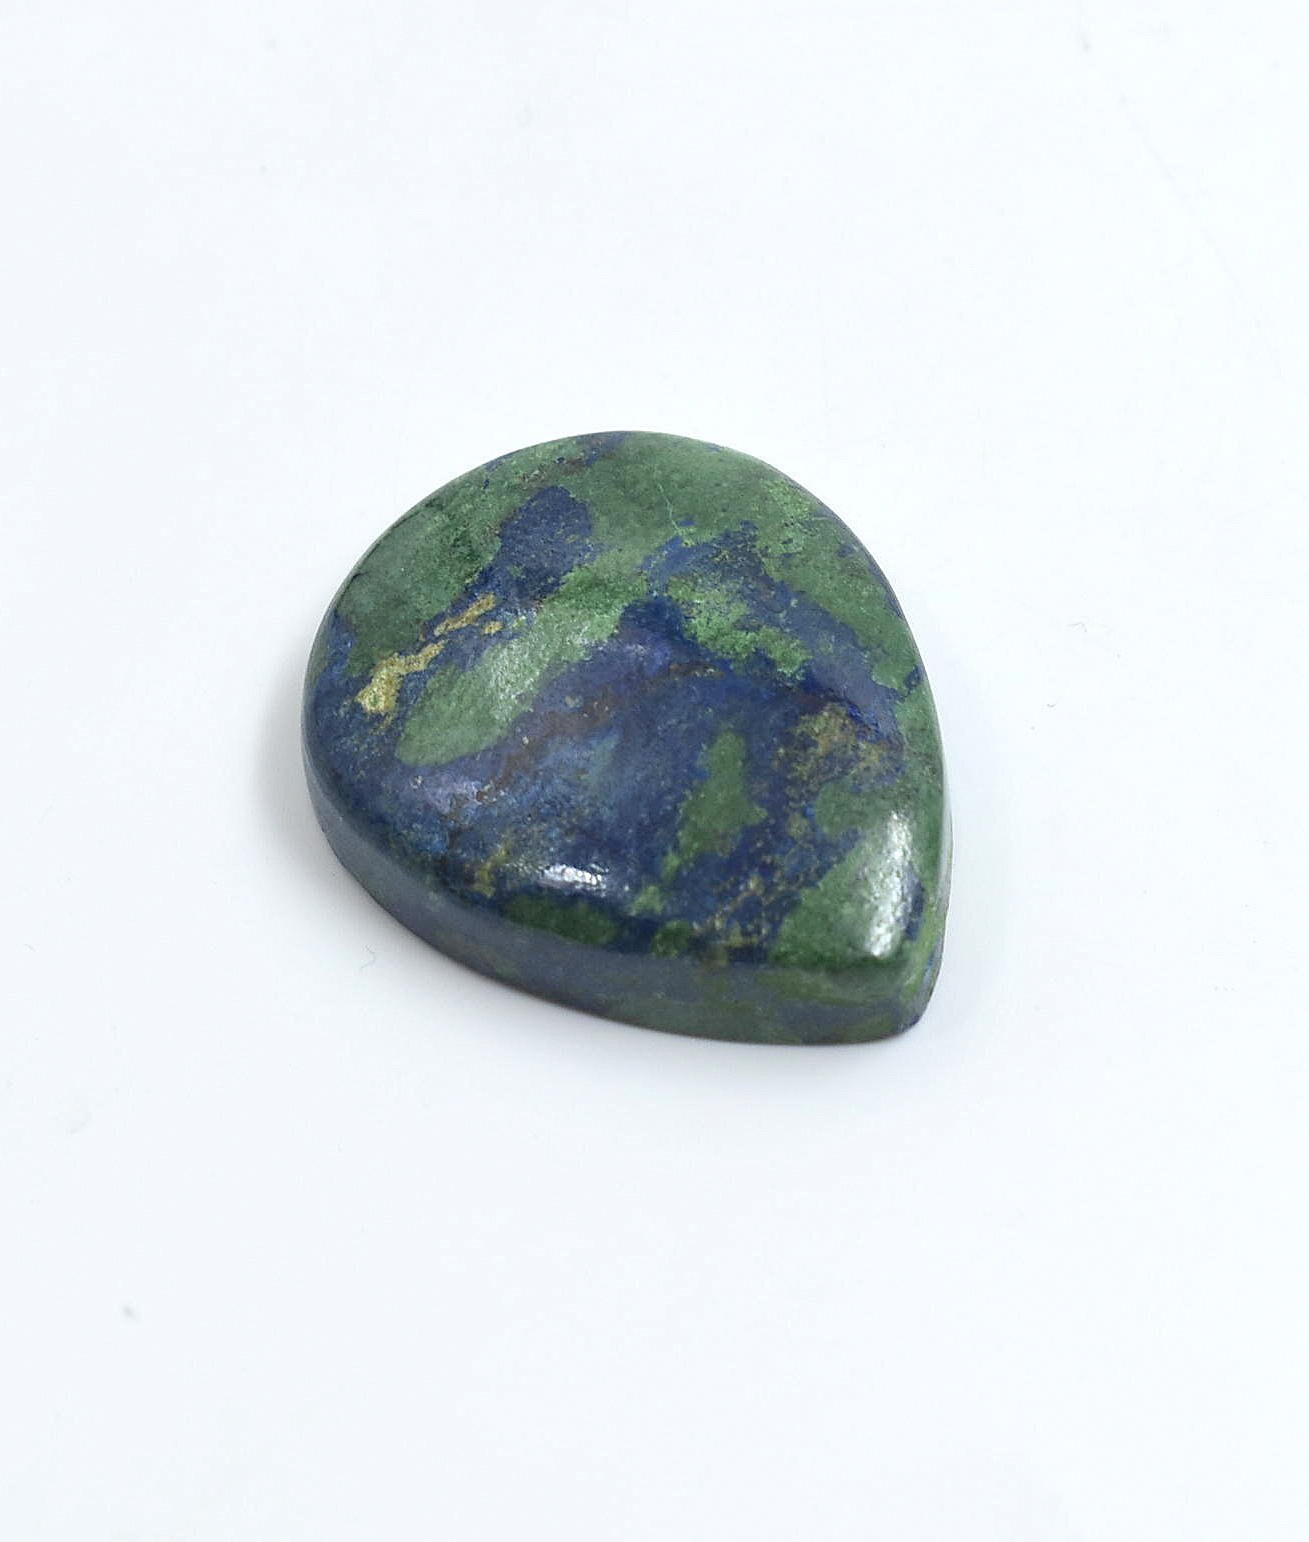 100% Natural Azurite Malachite Cabochon Good quality stone Beautiful Art Making for jewellery Ring 45.95 CARAT 28X22 MM | Save 33% - Rajasthan Living 13